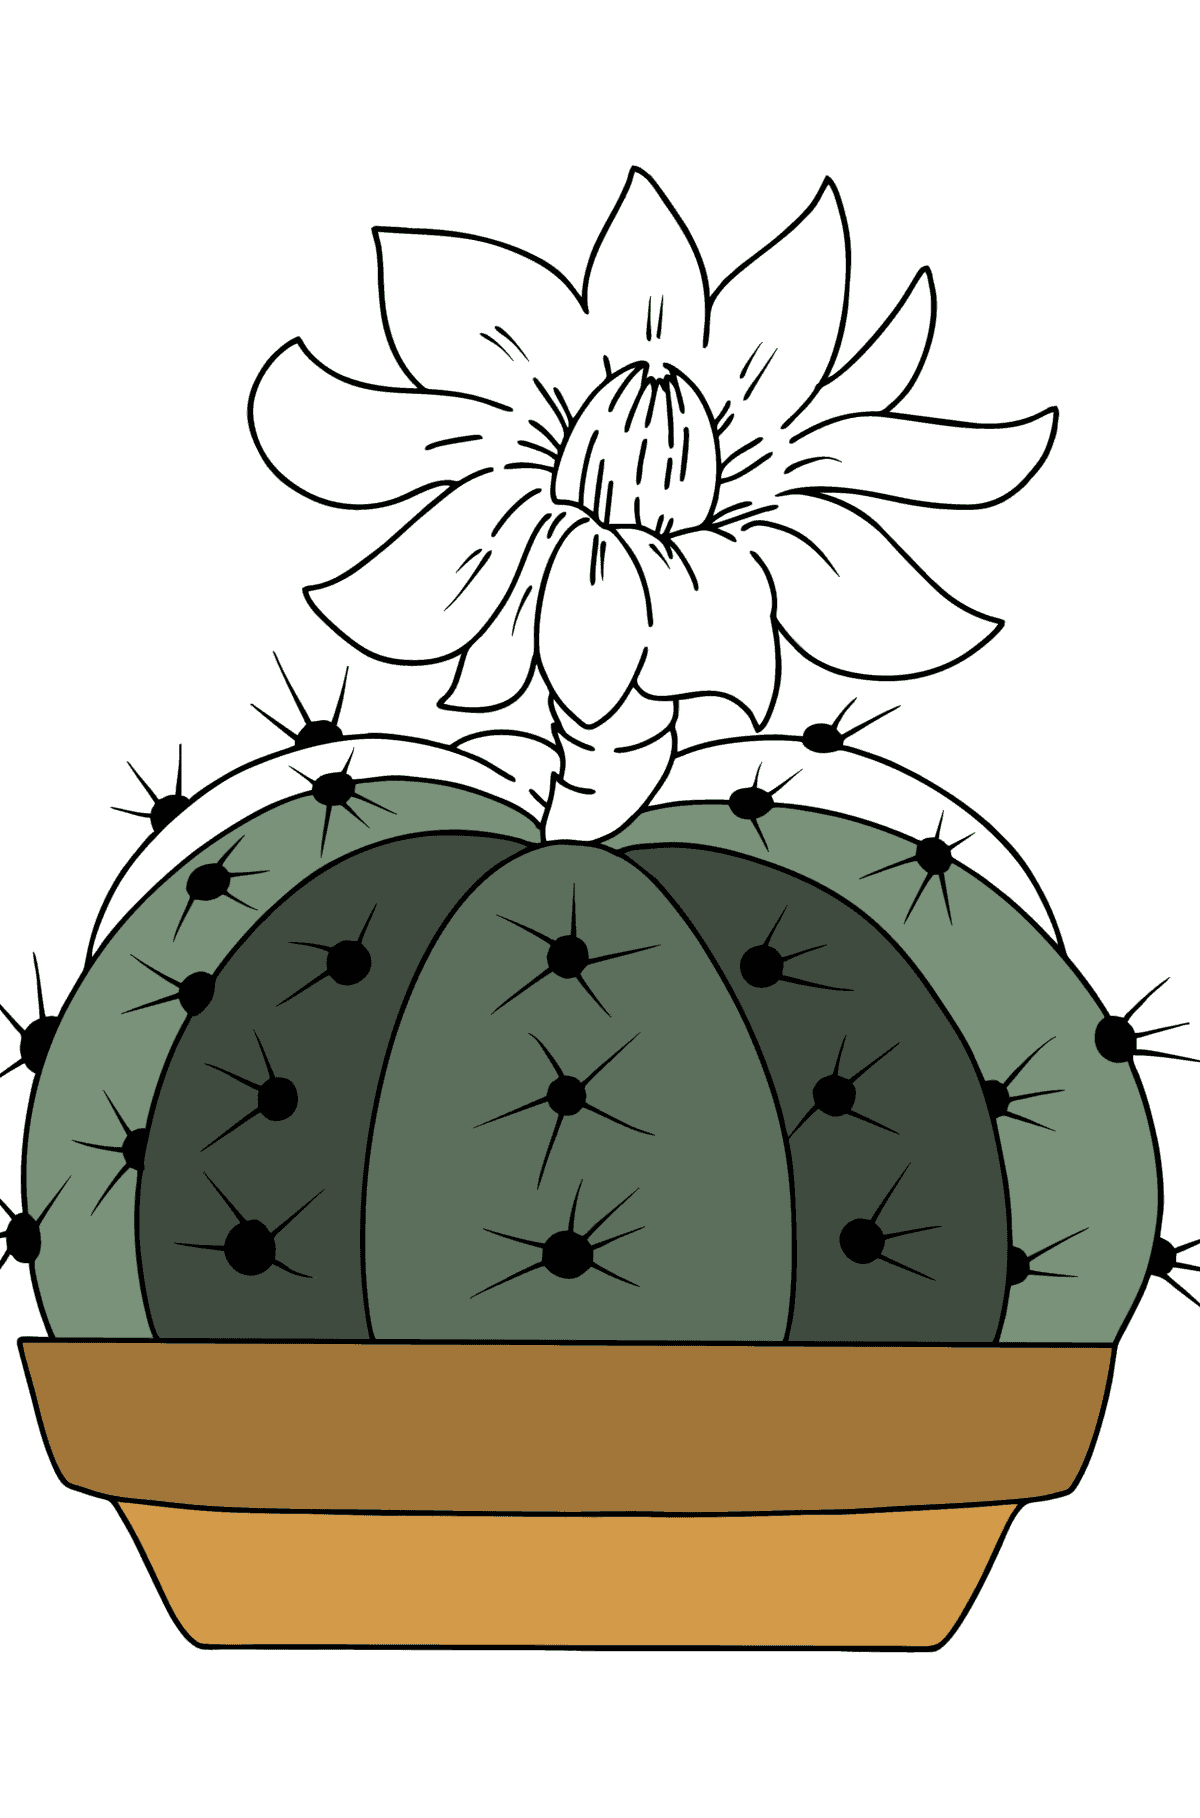 Cactus coloring page - Coloring Pages for Kids